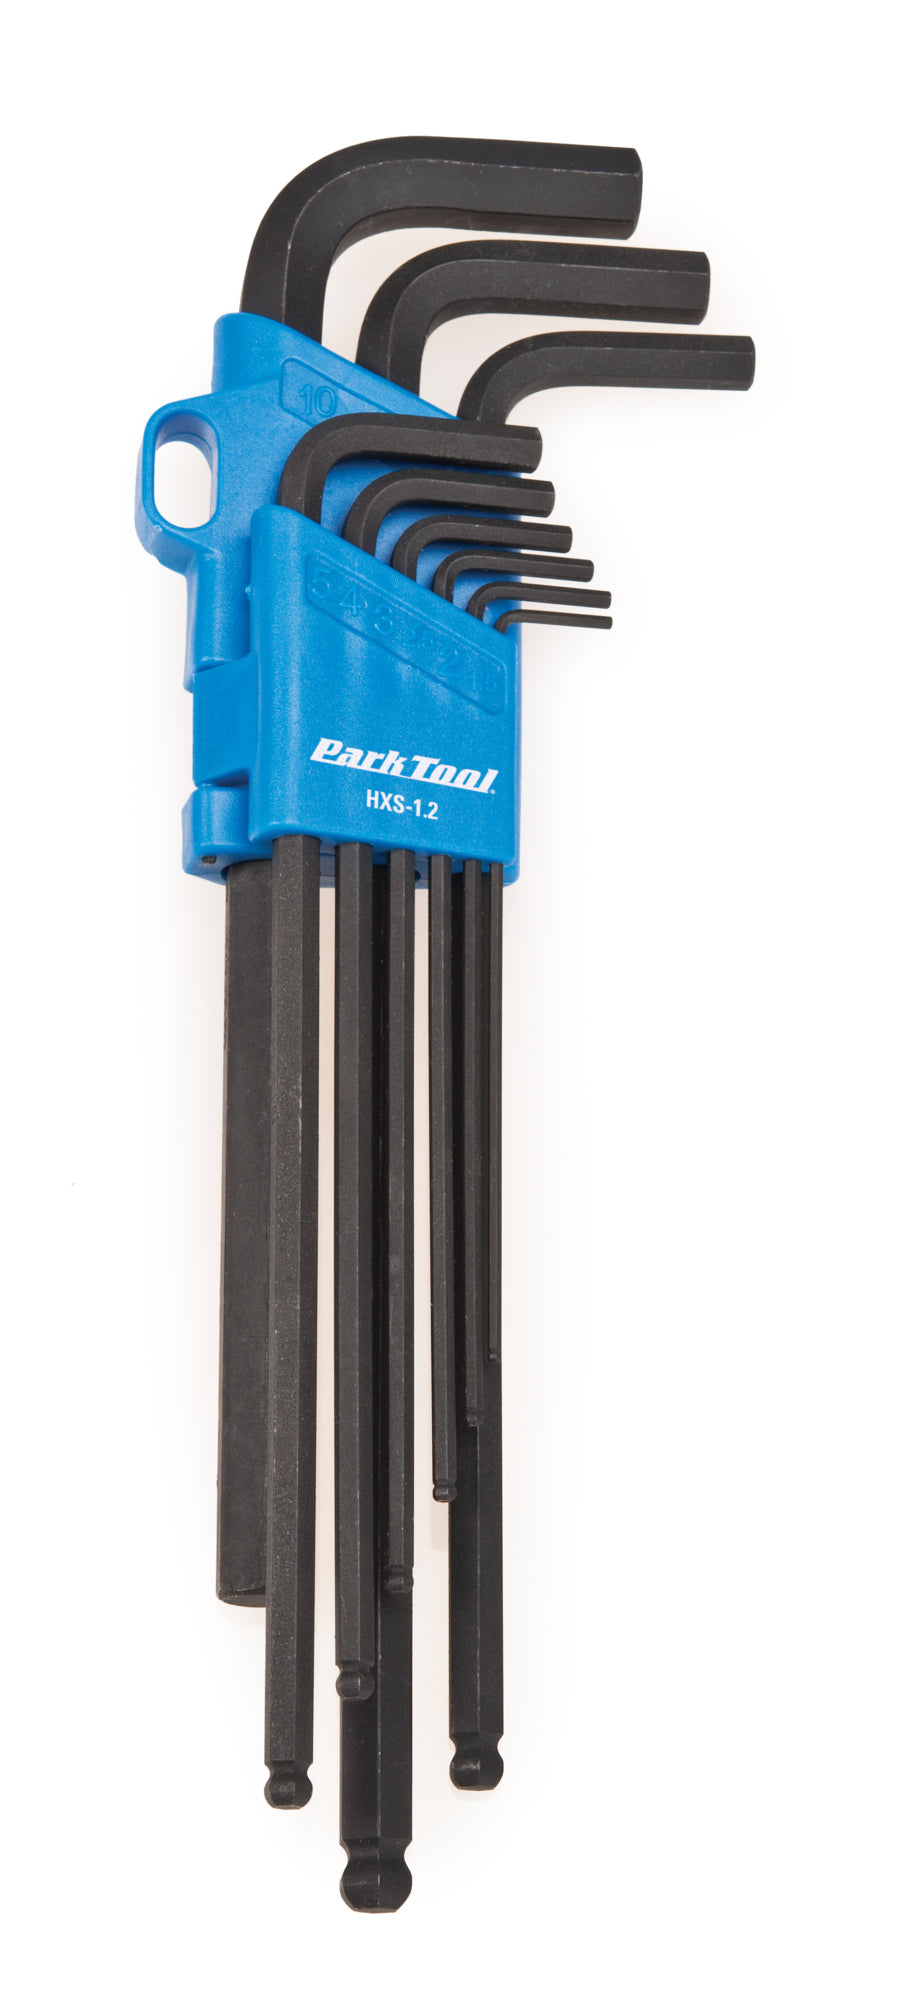 Park Tool HXS-1.2  L-Shaped Hex Wrench Set